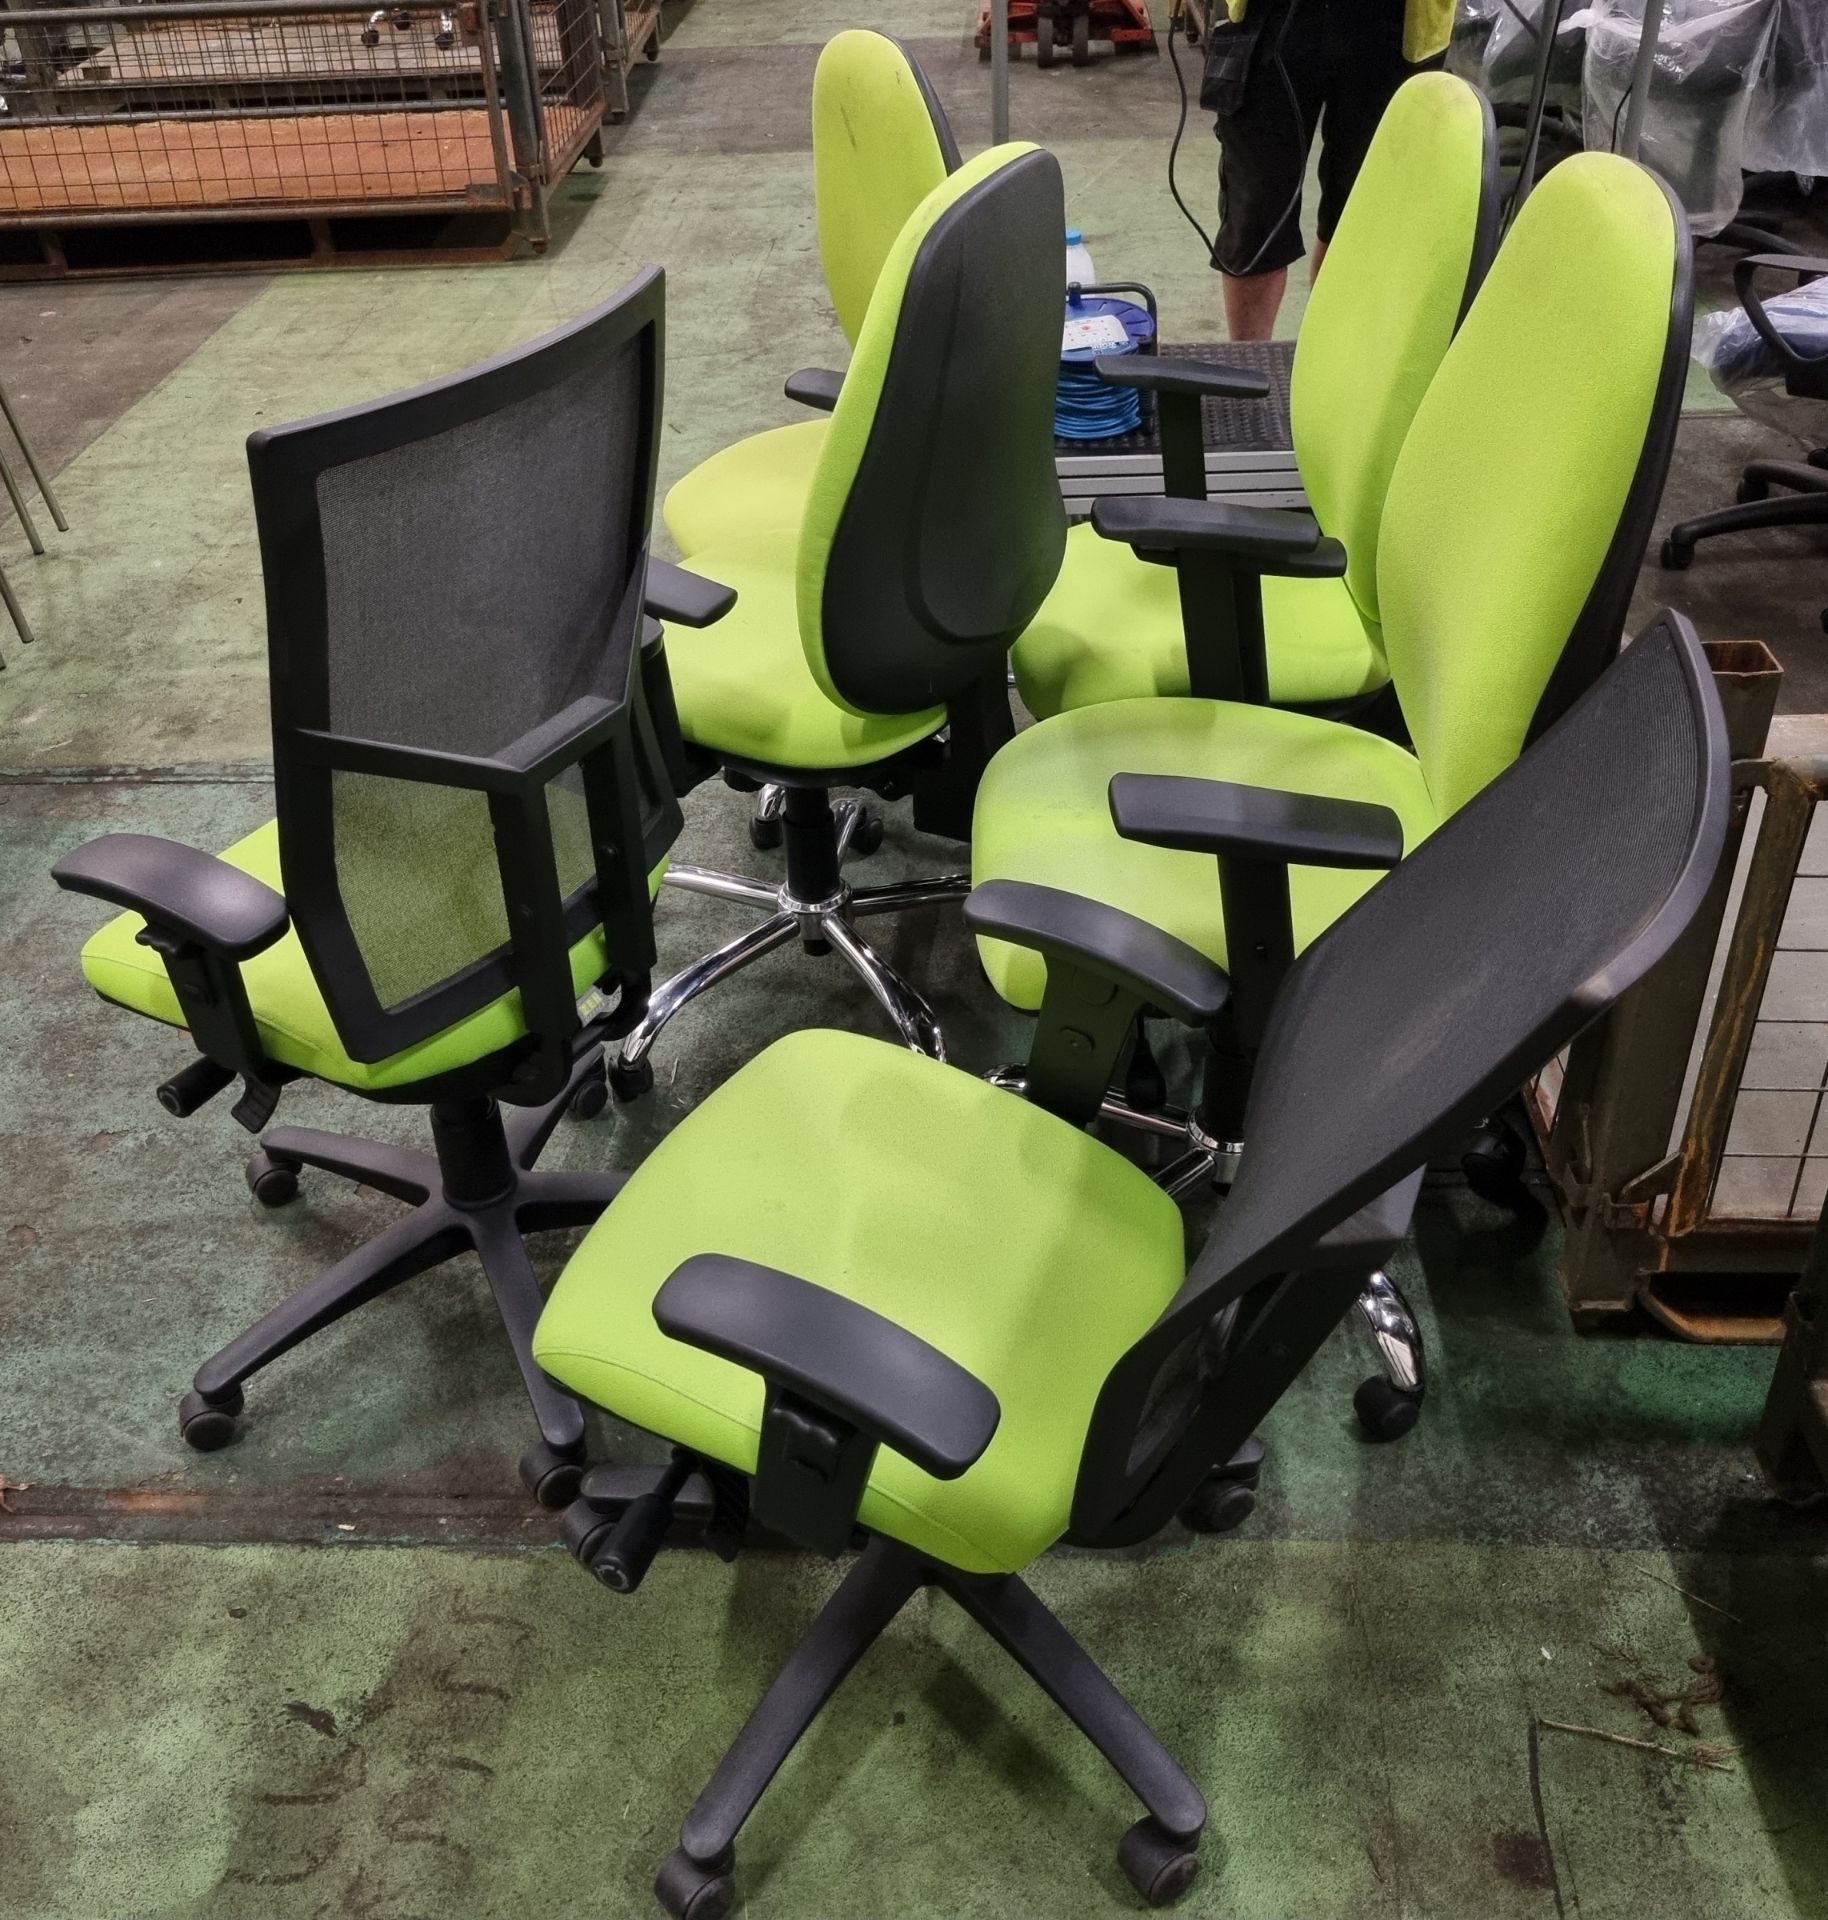 6x assorted green office chairs - Image 3 of 3